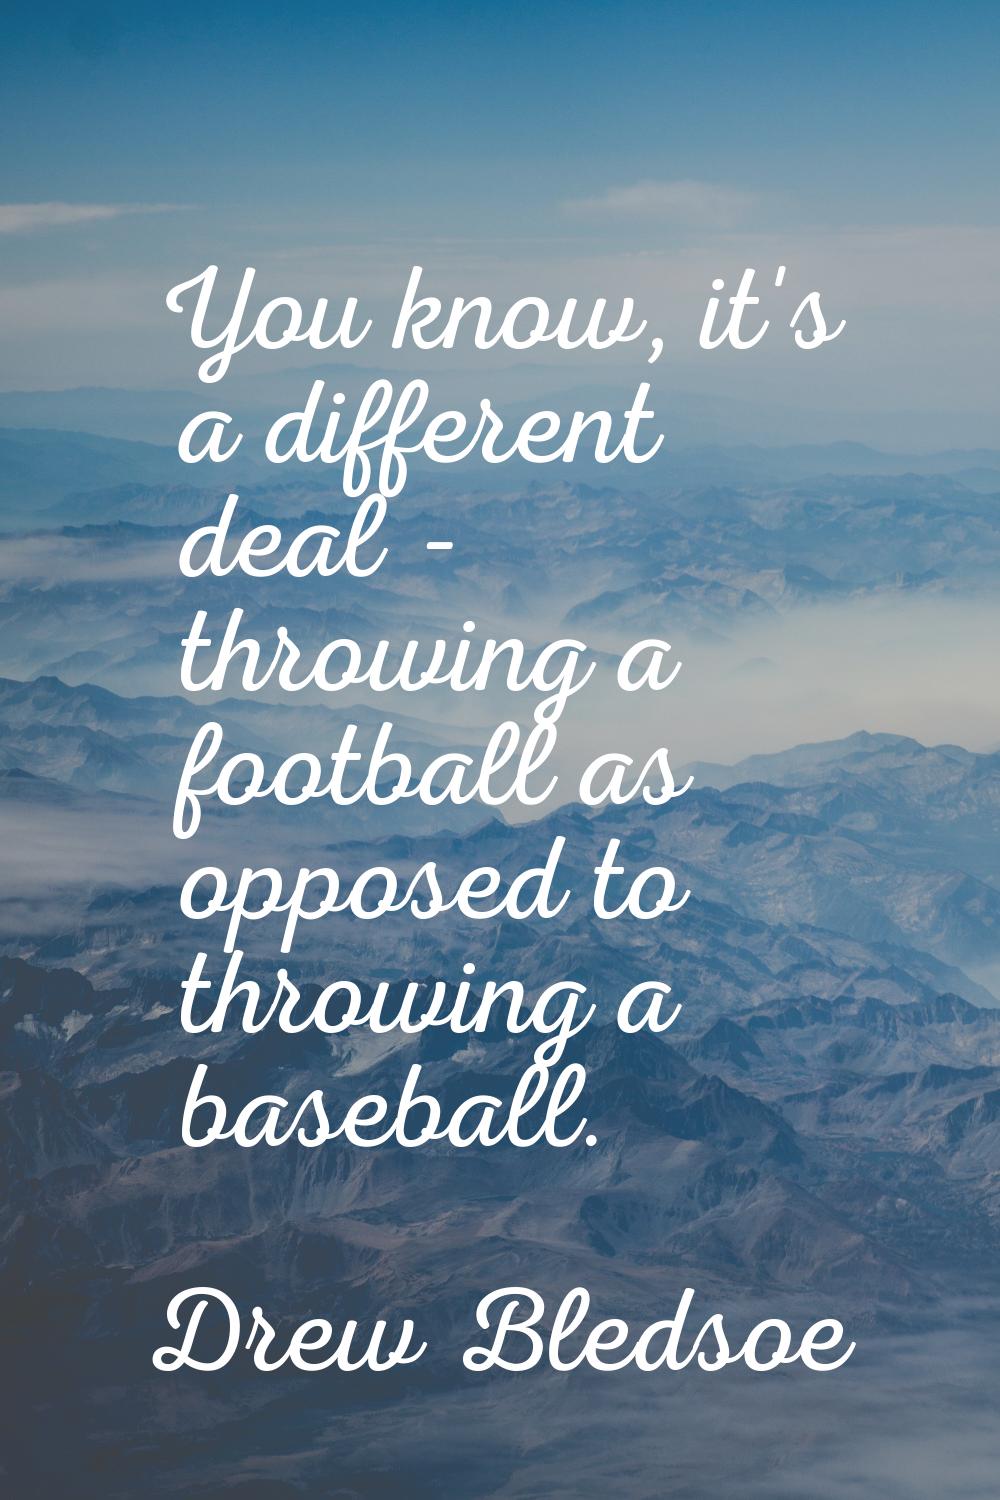 You know, it's a different deal - throwing a football as opposed to throwing a baseball.